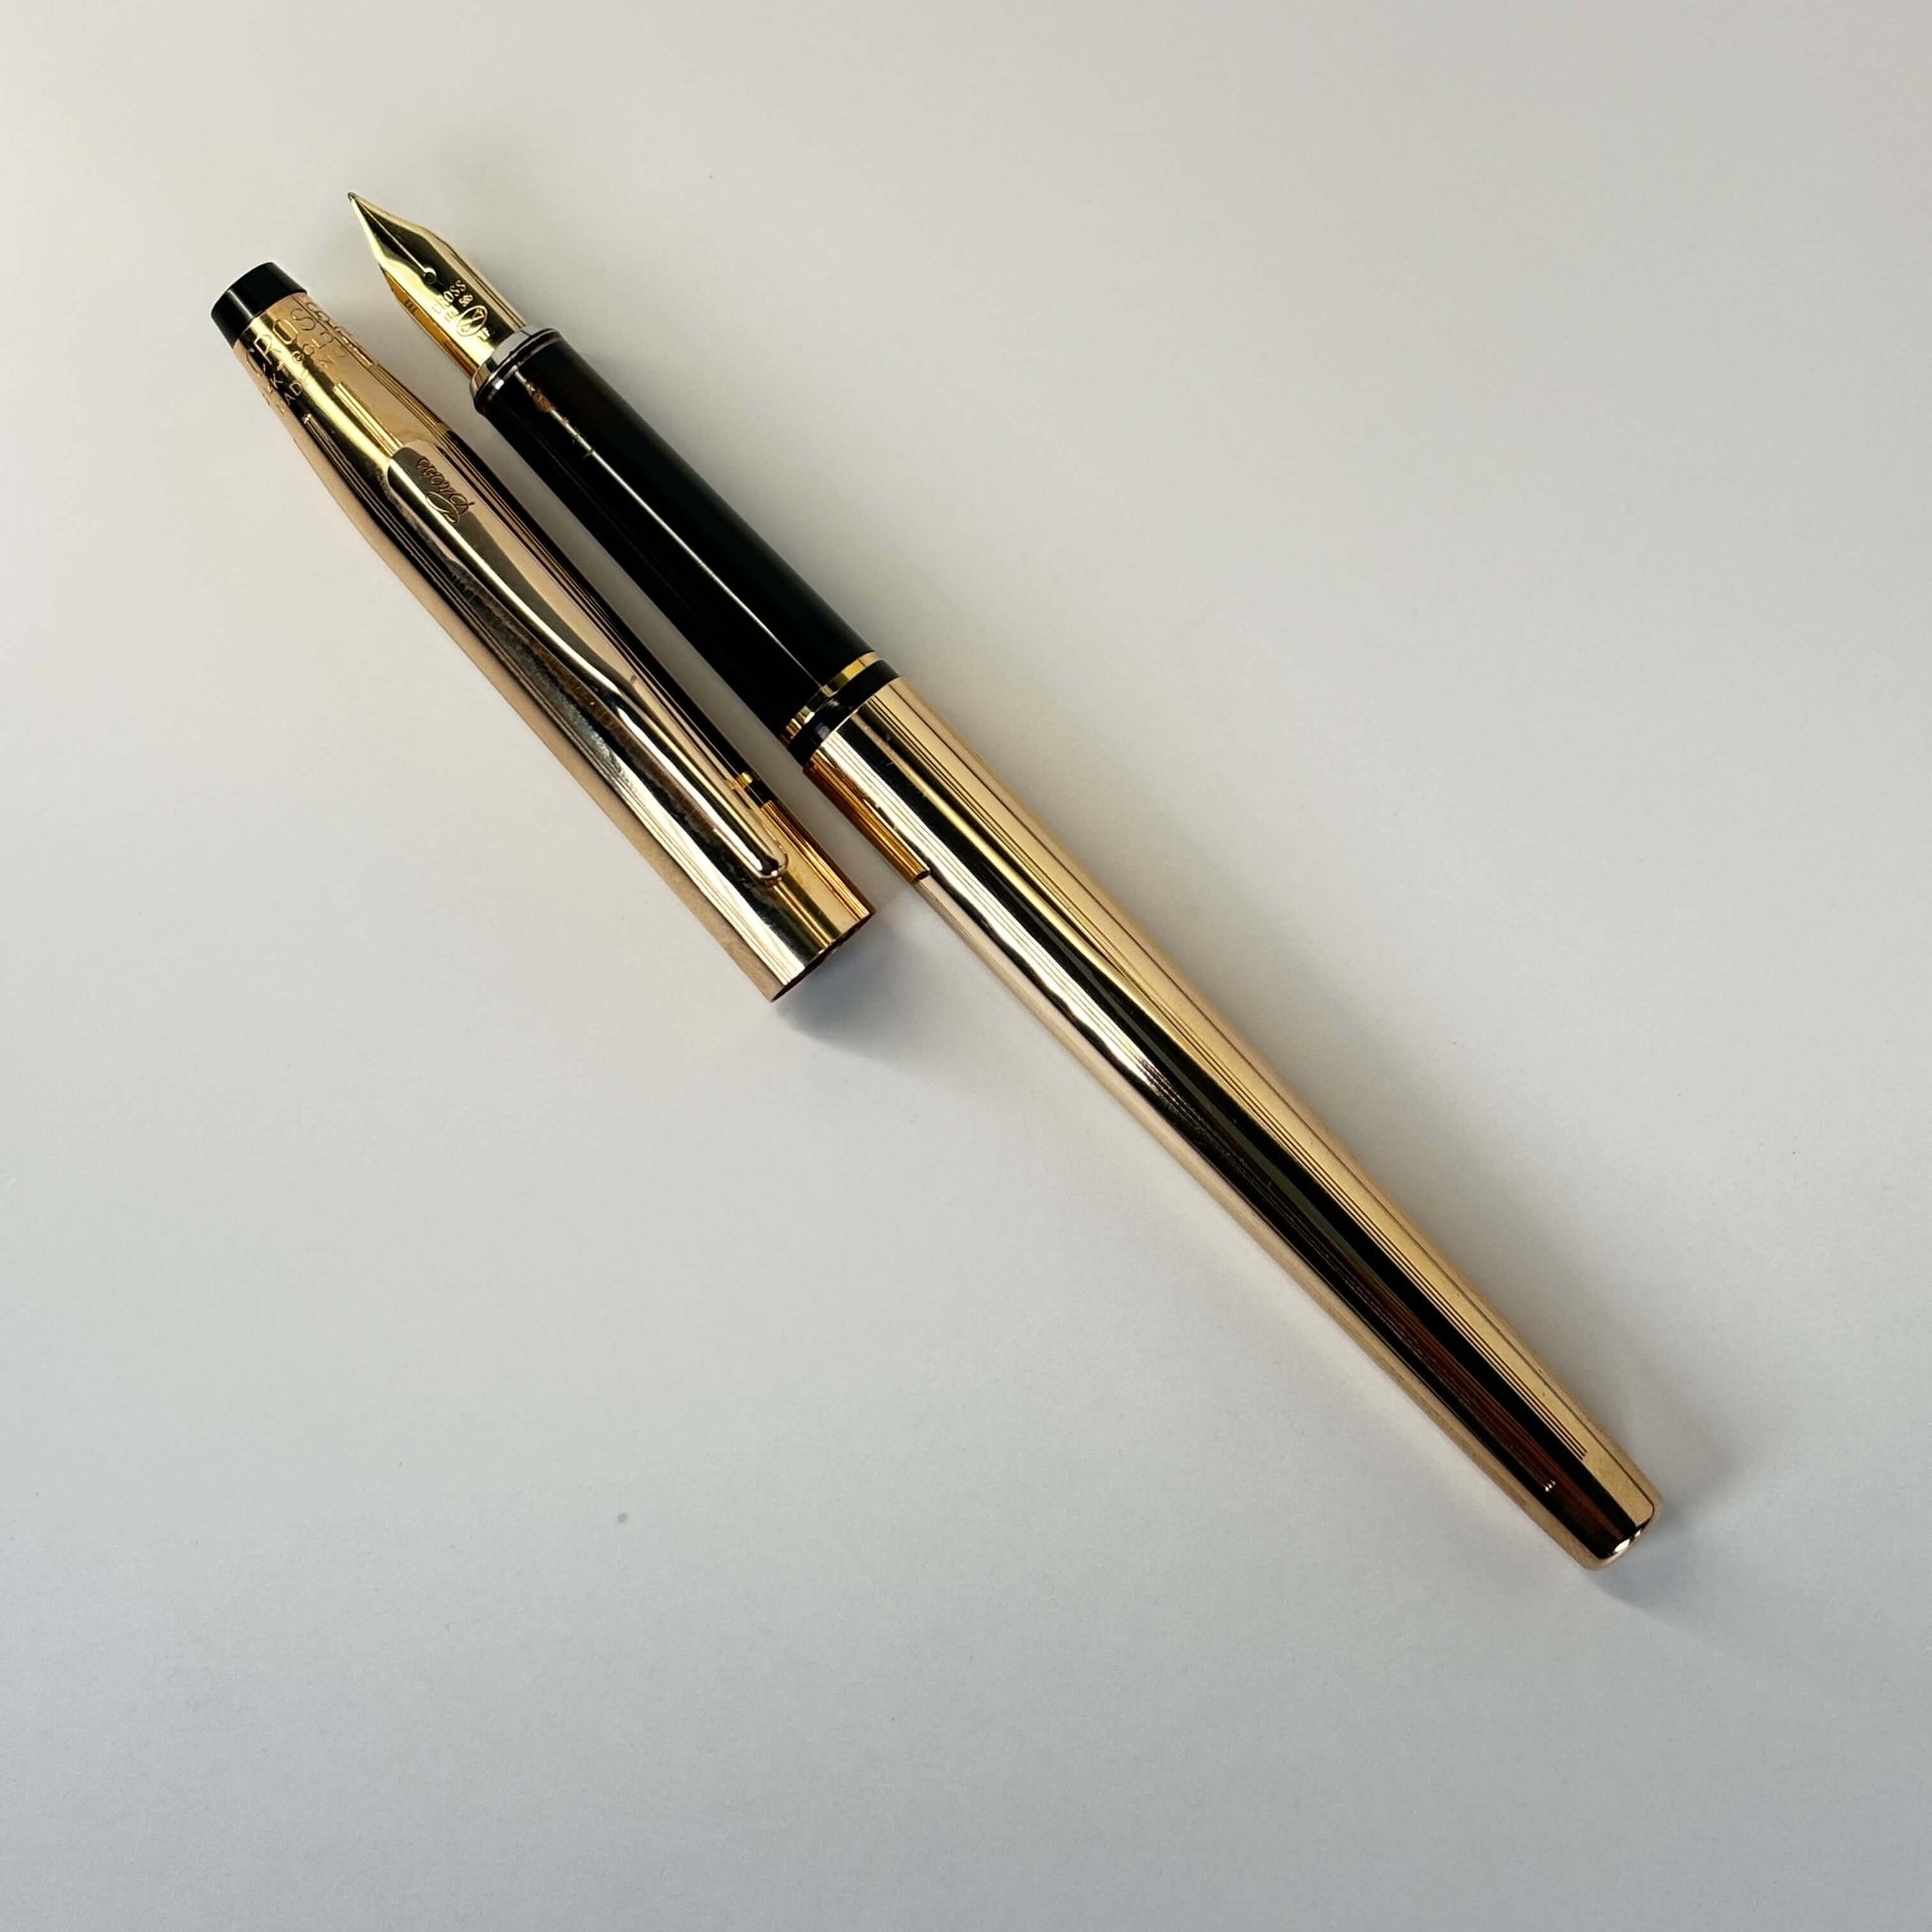 Cross Century II, 14K Gold Filled Cap and Barrel, 14K Gold Medium Nib Name/Type: Cross Century II Manufacture Year: 1980s Length: 5 1/4 Filling System: Cartridge/Converter, (Converter is included) Color/Pattern: Cap and Barrel made of 14K Gold Fill. Nib T